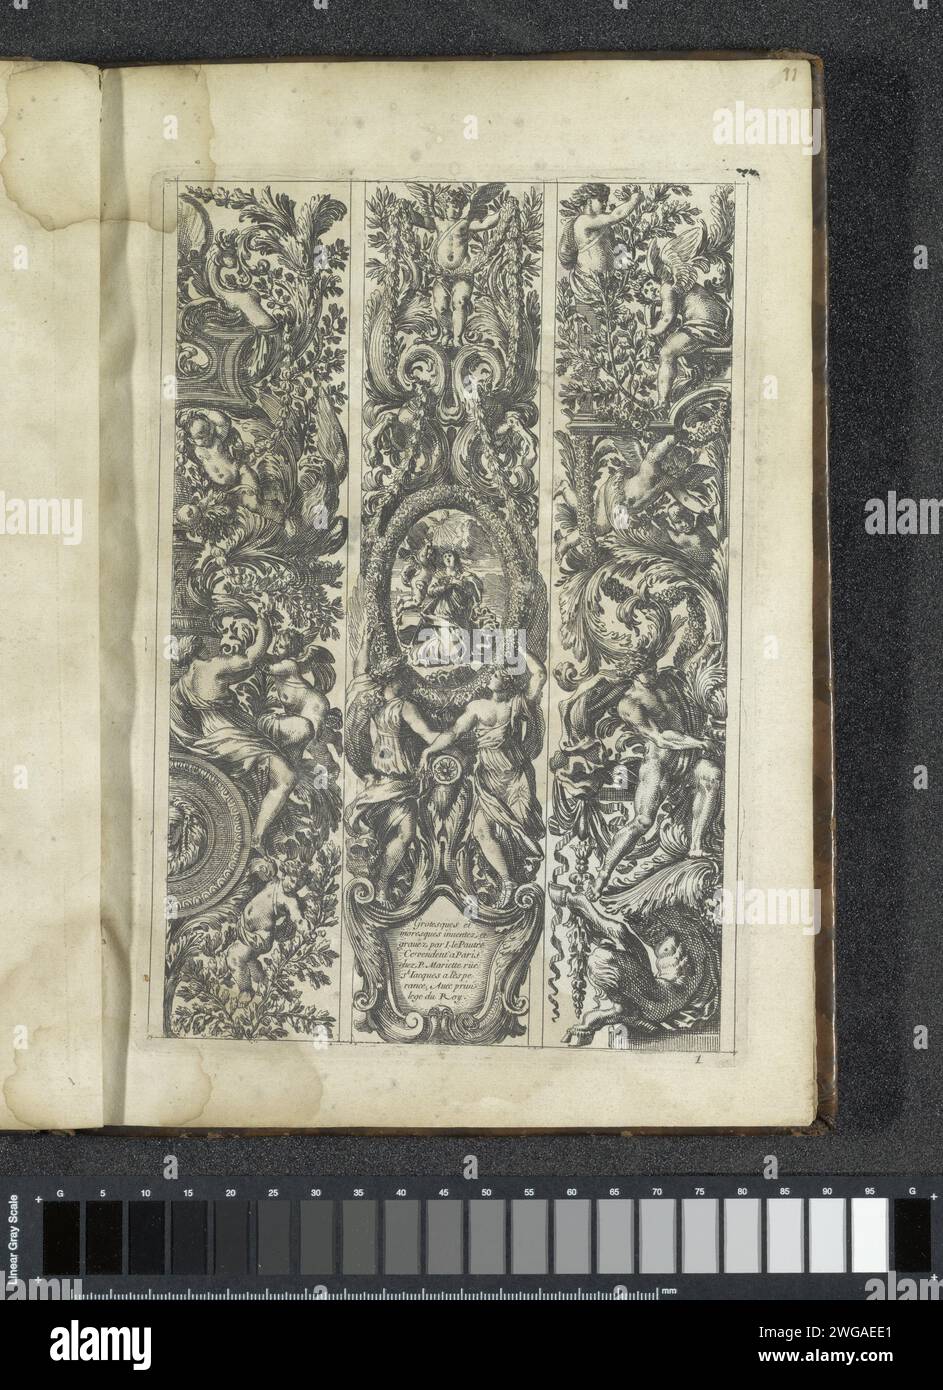 Three vertical panels with leaf ornament and figures, After 1634 - Before 1667 print Three vertical panels with leaf ornament and figures. In the middle panel an oval medallion containing the personification of hope. Print is part of an album. Paris paper etching ornaments  art. ornament  grotesque. Hope, 'Spes'; 'Speranza divina e certa' (Ripa)  one of the Three Theological Virtues Stock Photo